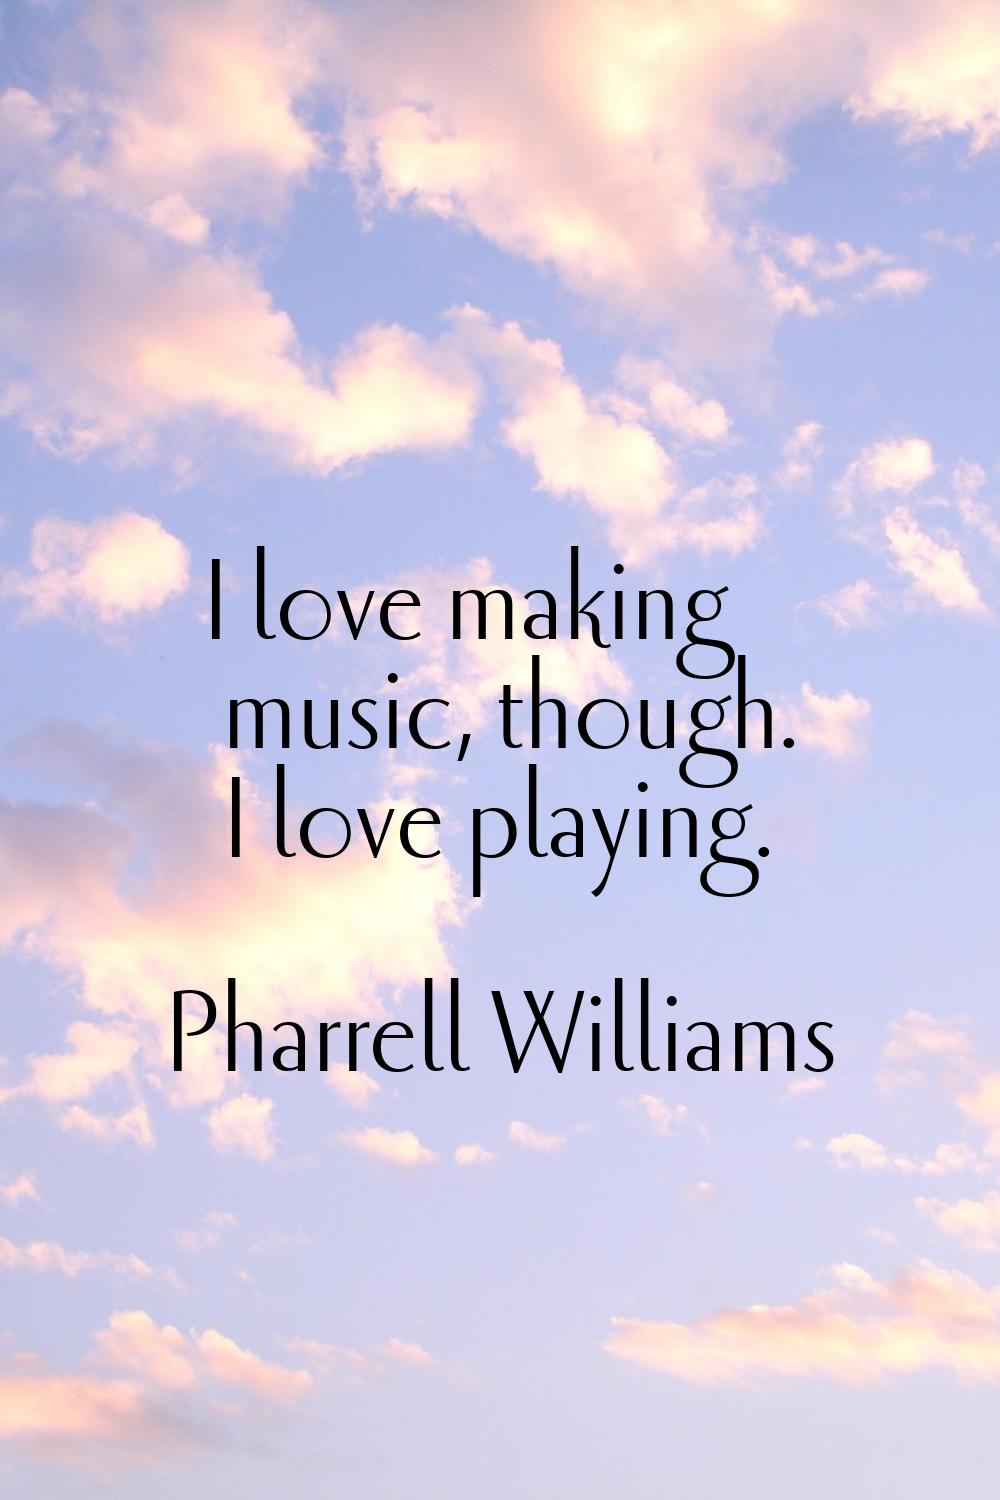 I love making music, though. I love playing.